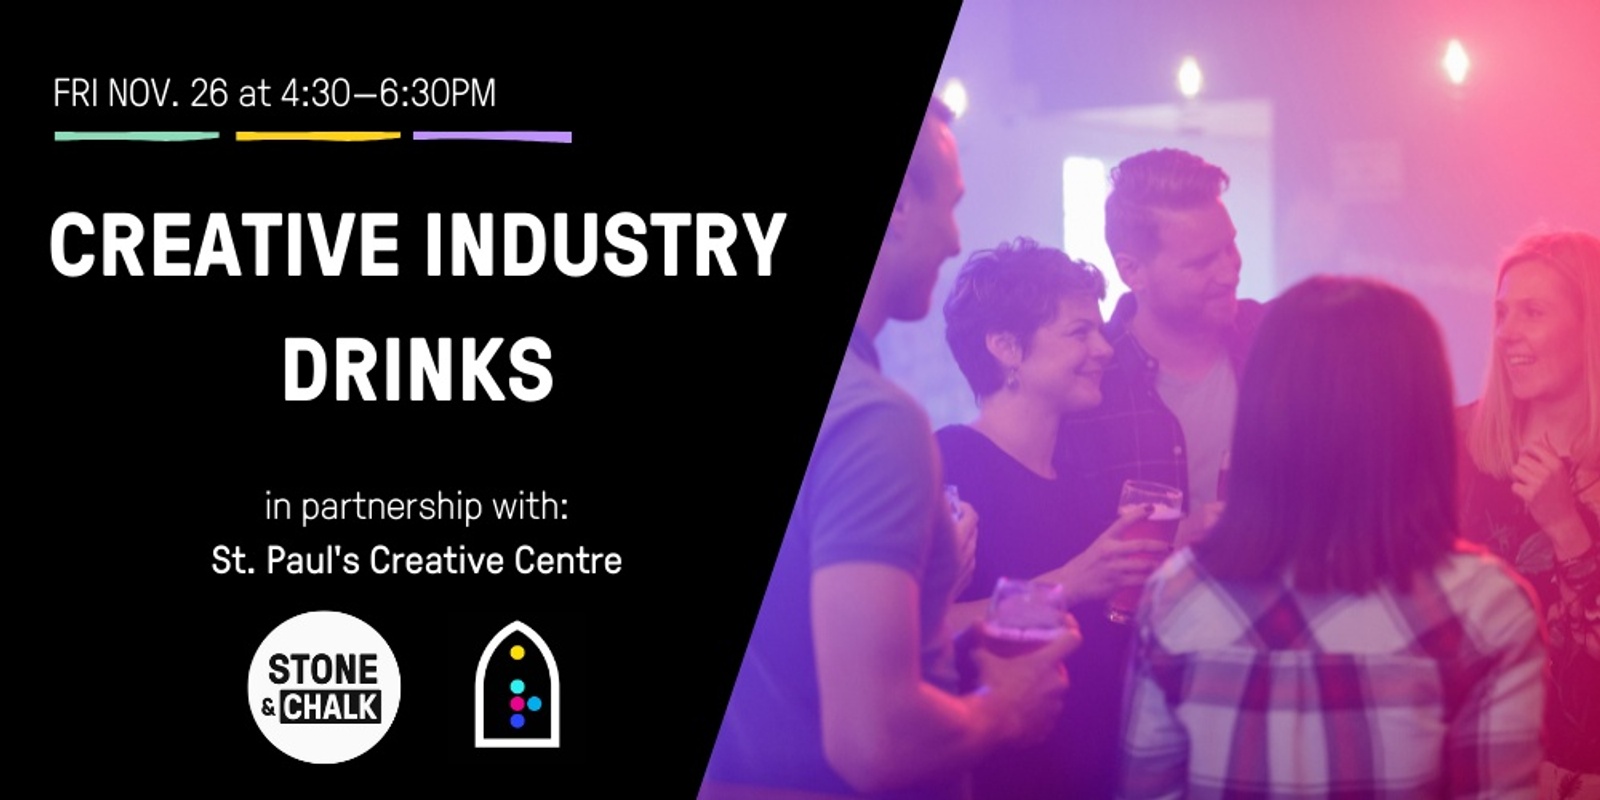 Banner image for Creative Industry Drinks